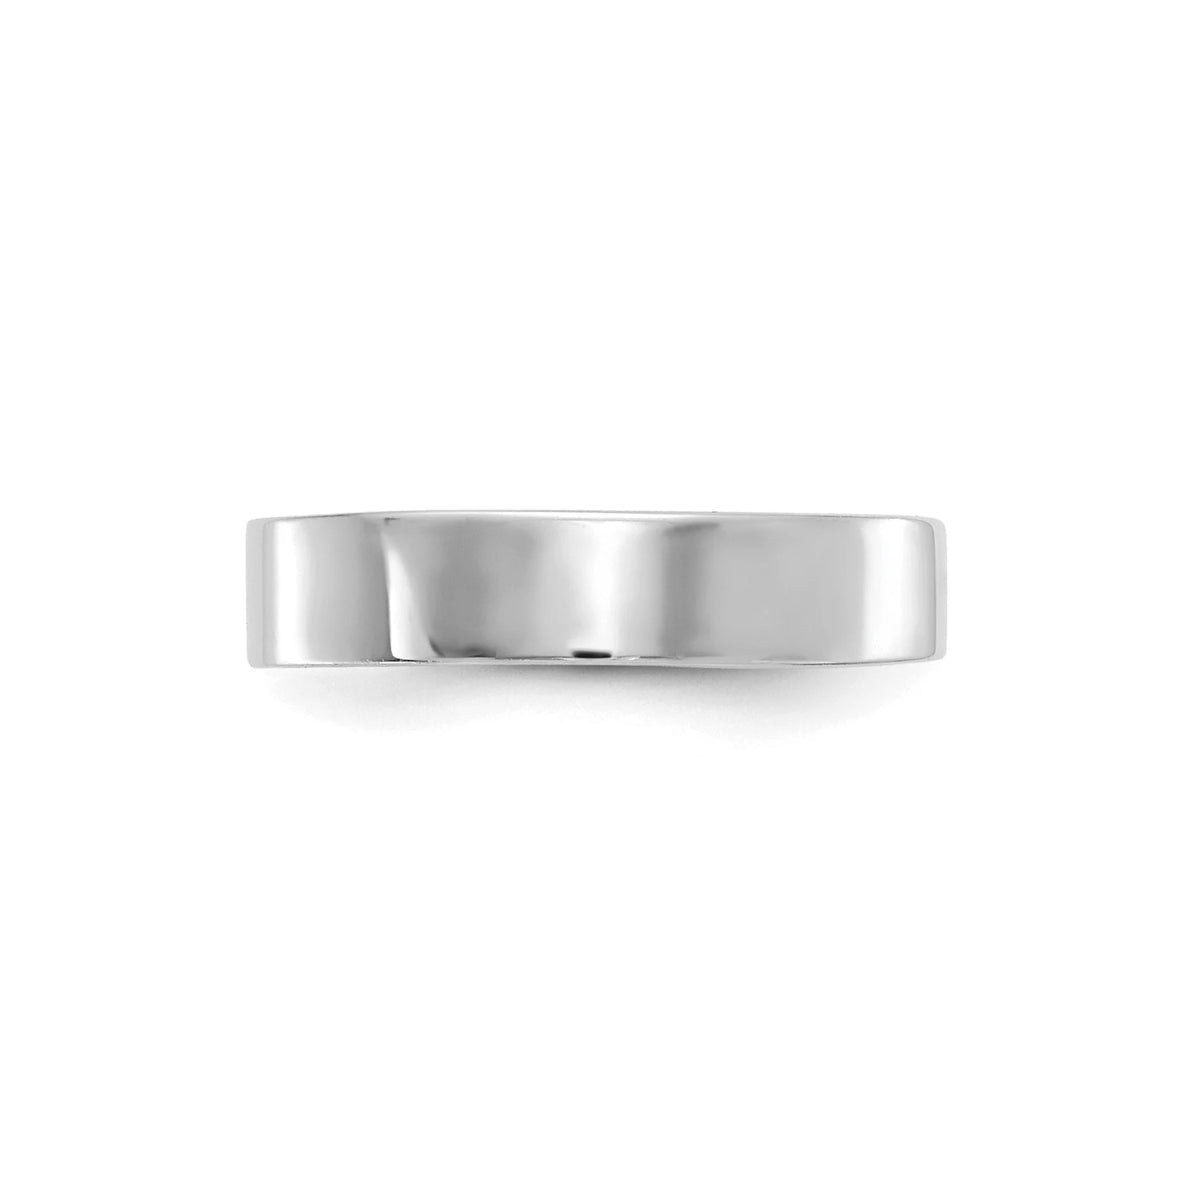 14k White Gold Solid Toe Ring 3mm Band - Gift Box Included - Polished & Rhodium Plated